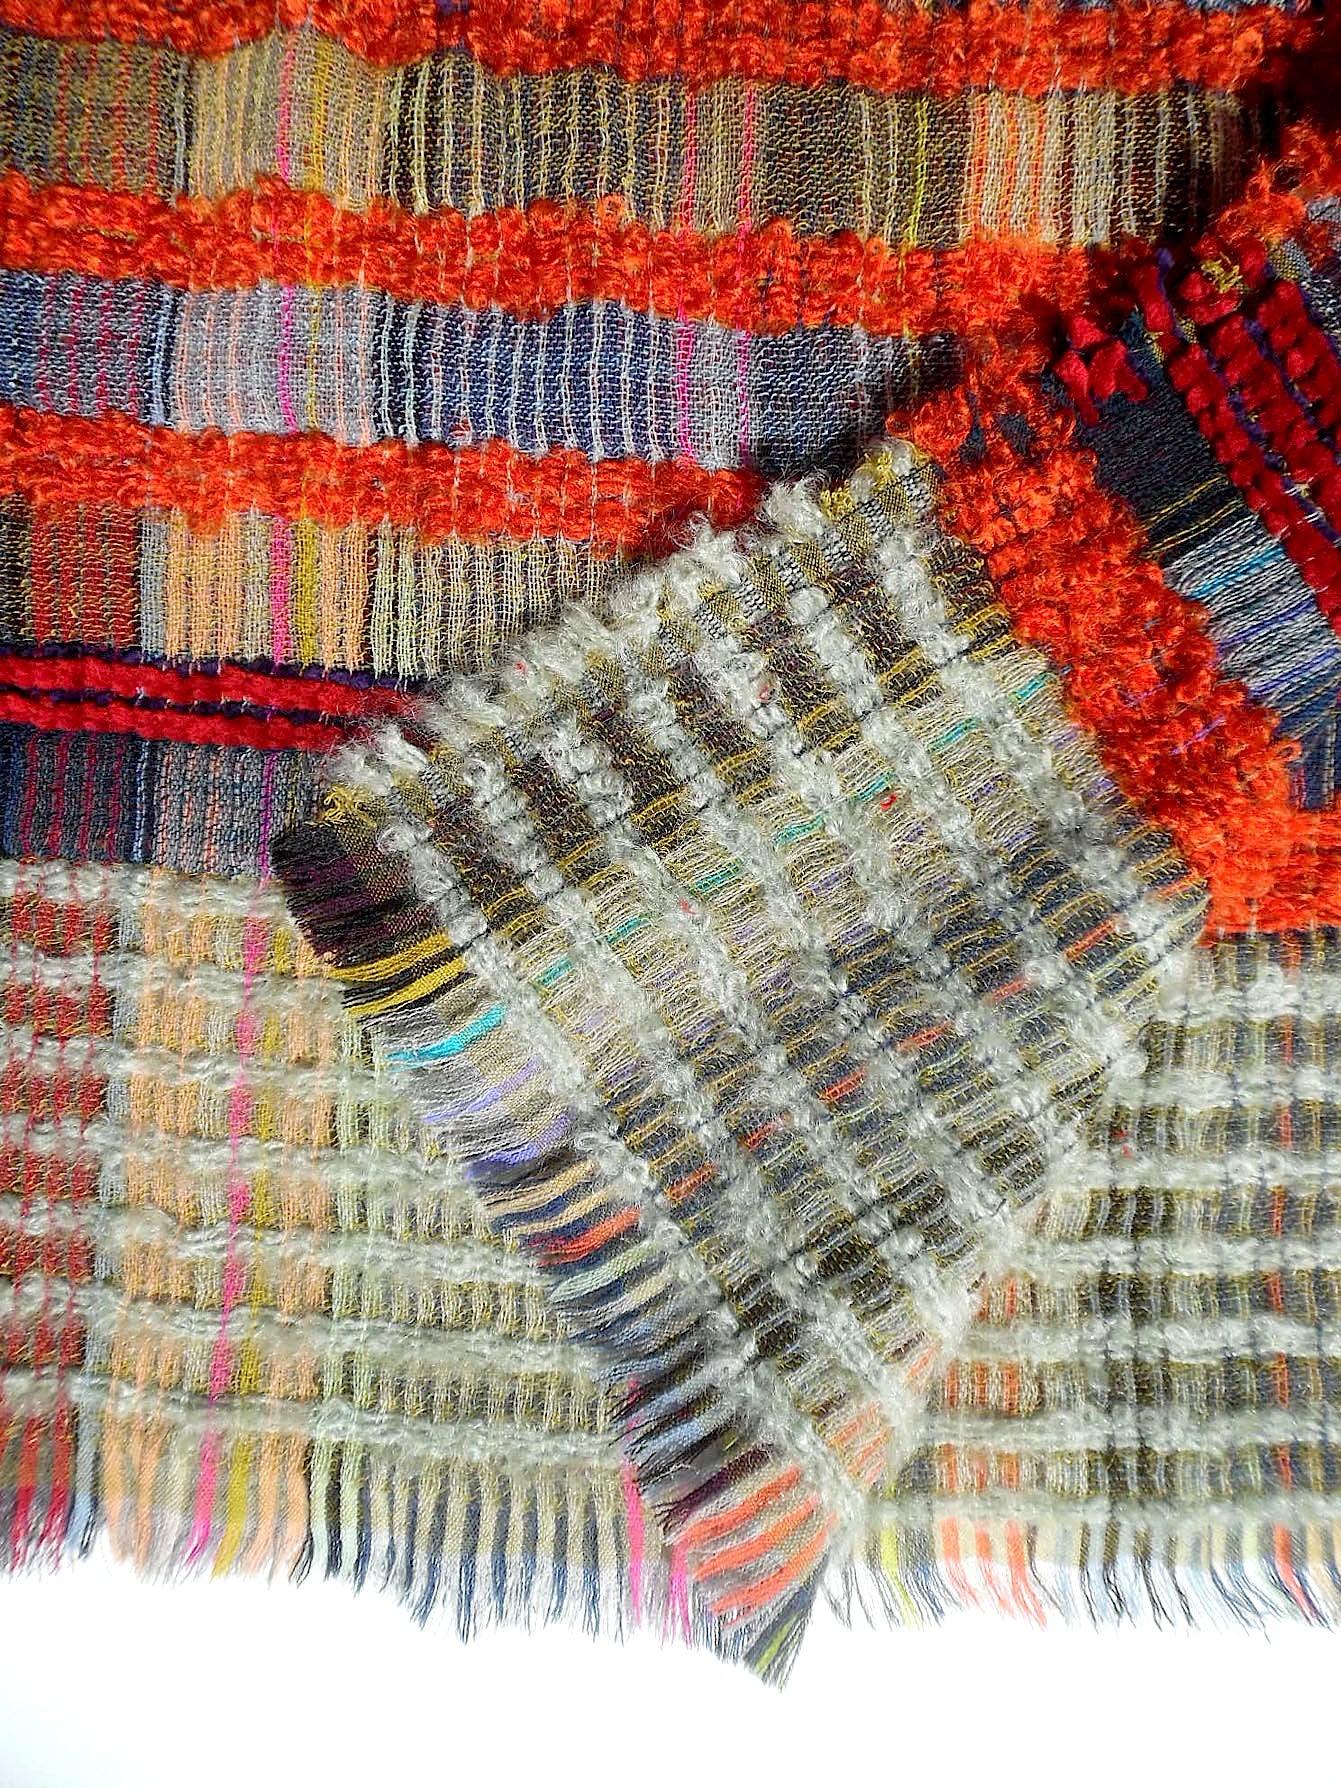 Scarf Lambswool Cotton Mohair Colorblock Red Orange Multi